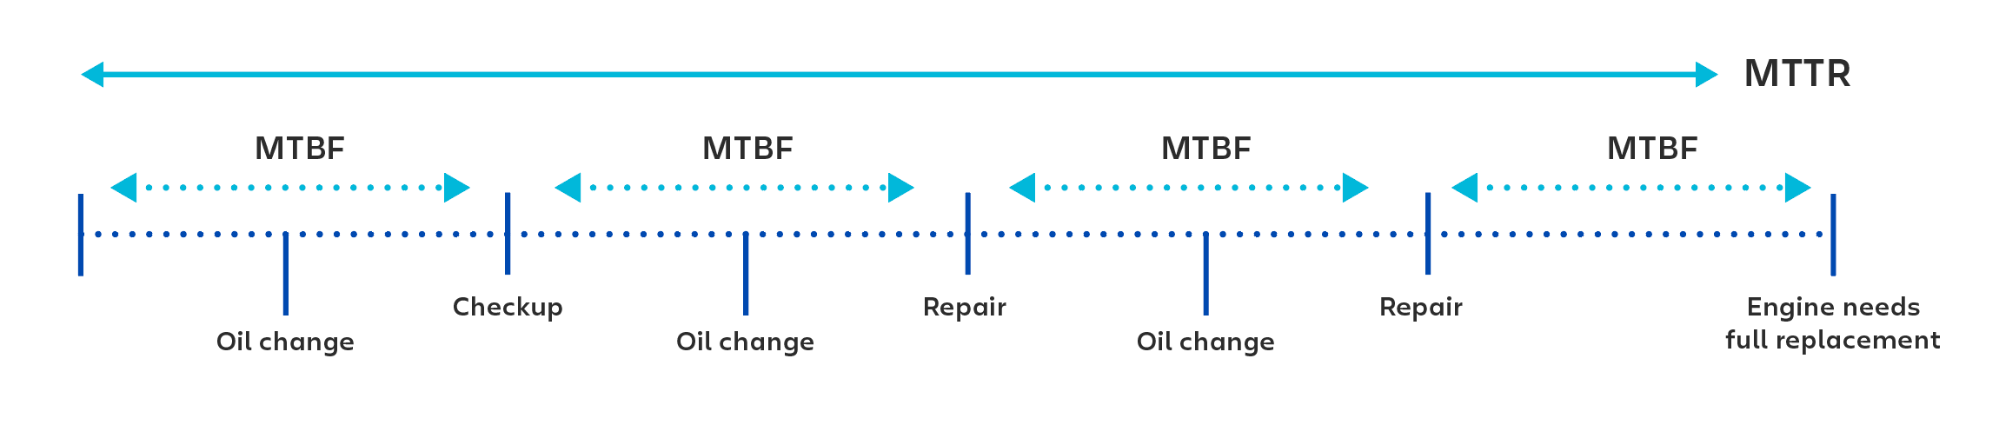 Visual example of using MTBF (mean time between failures) when calculating the time between each checkup or repair.